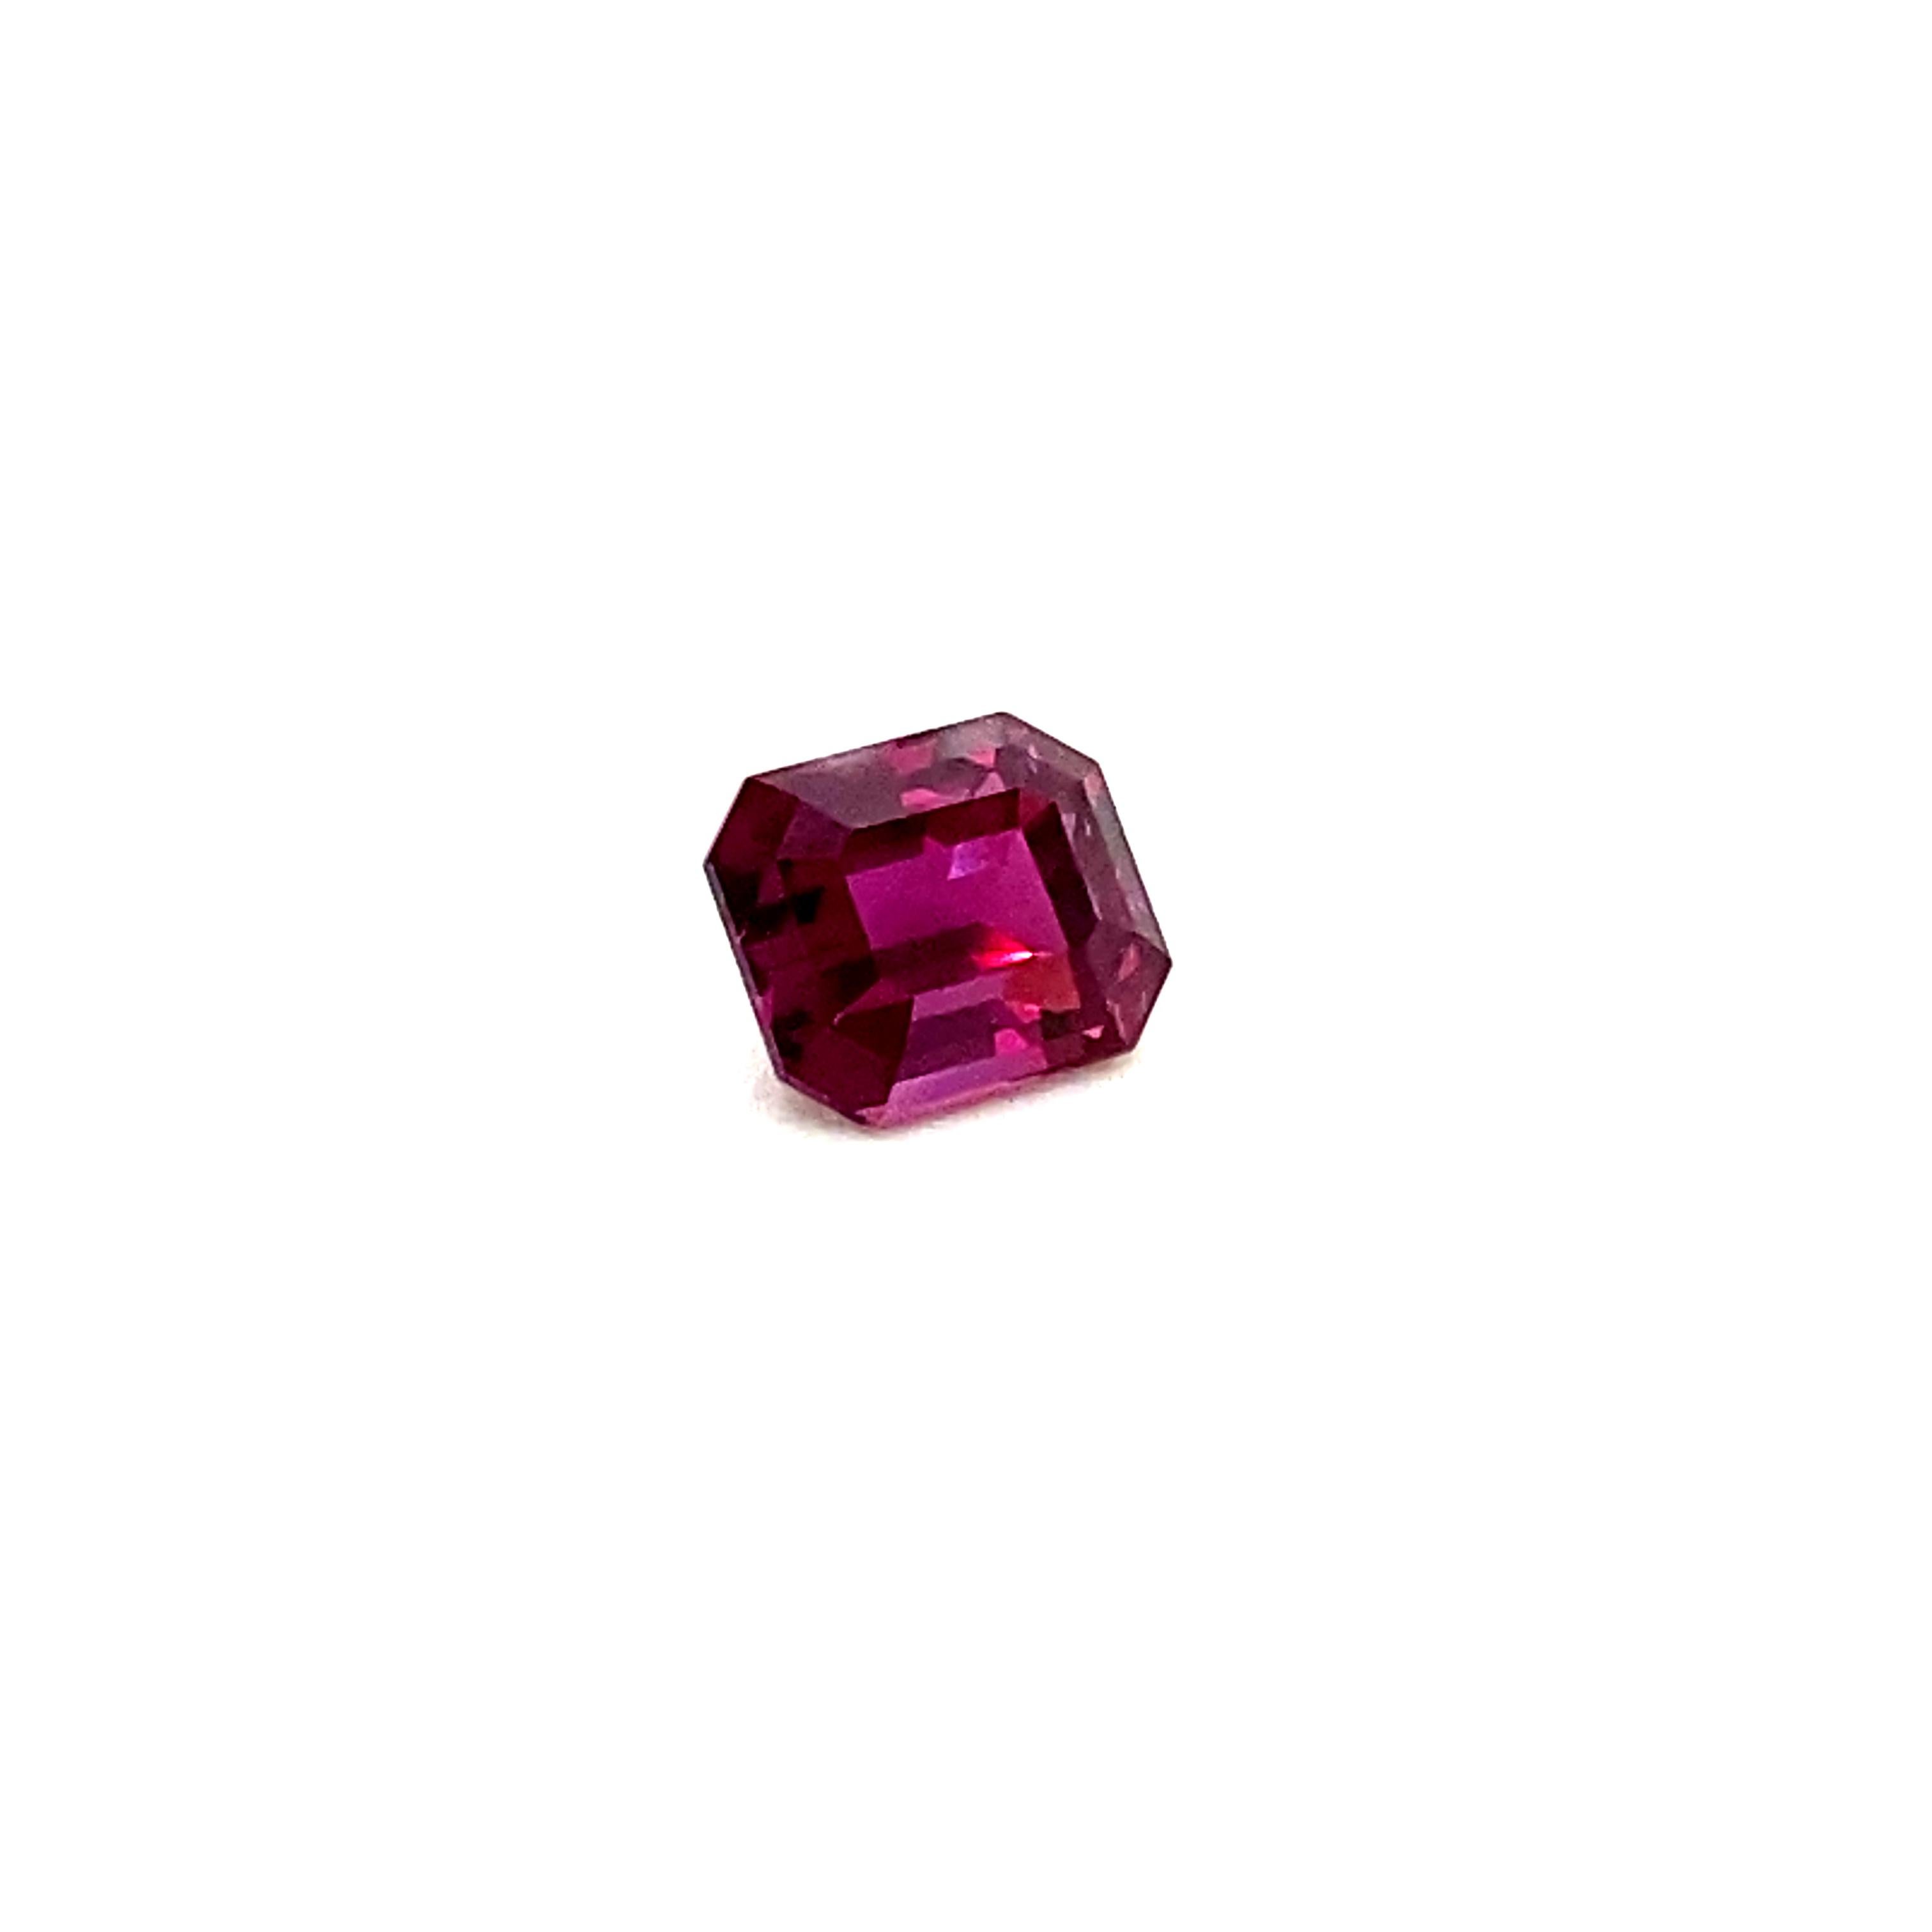 2.25 Carat GRS Certified Octagon Cut Vivid Purple-Red Ruby:

A very rare gemstone, it is a GRS certified natural octagon cut vivid purple-red ruby weighing 2.25 carat. The ruby has excellent cutting proportions, and possesses extremely fine colour